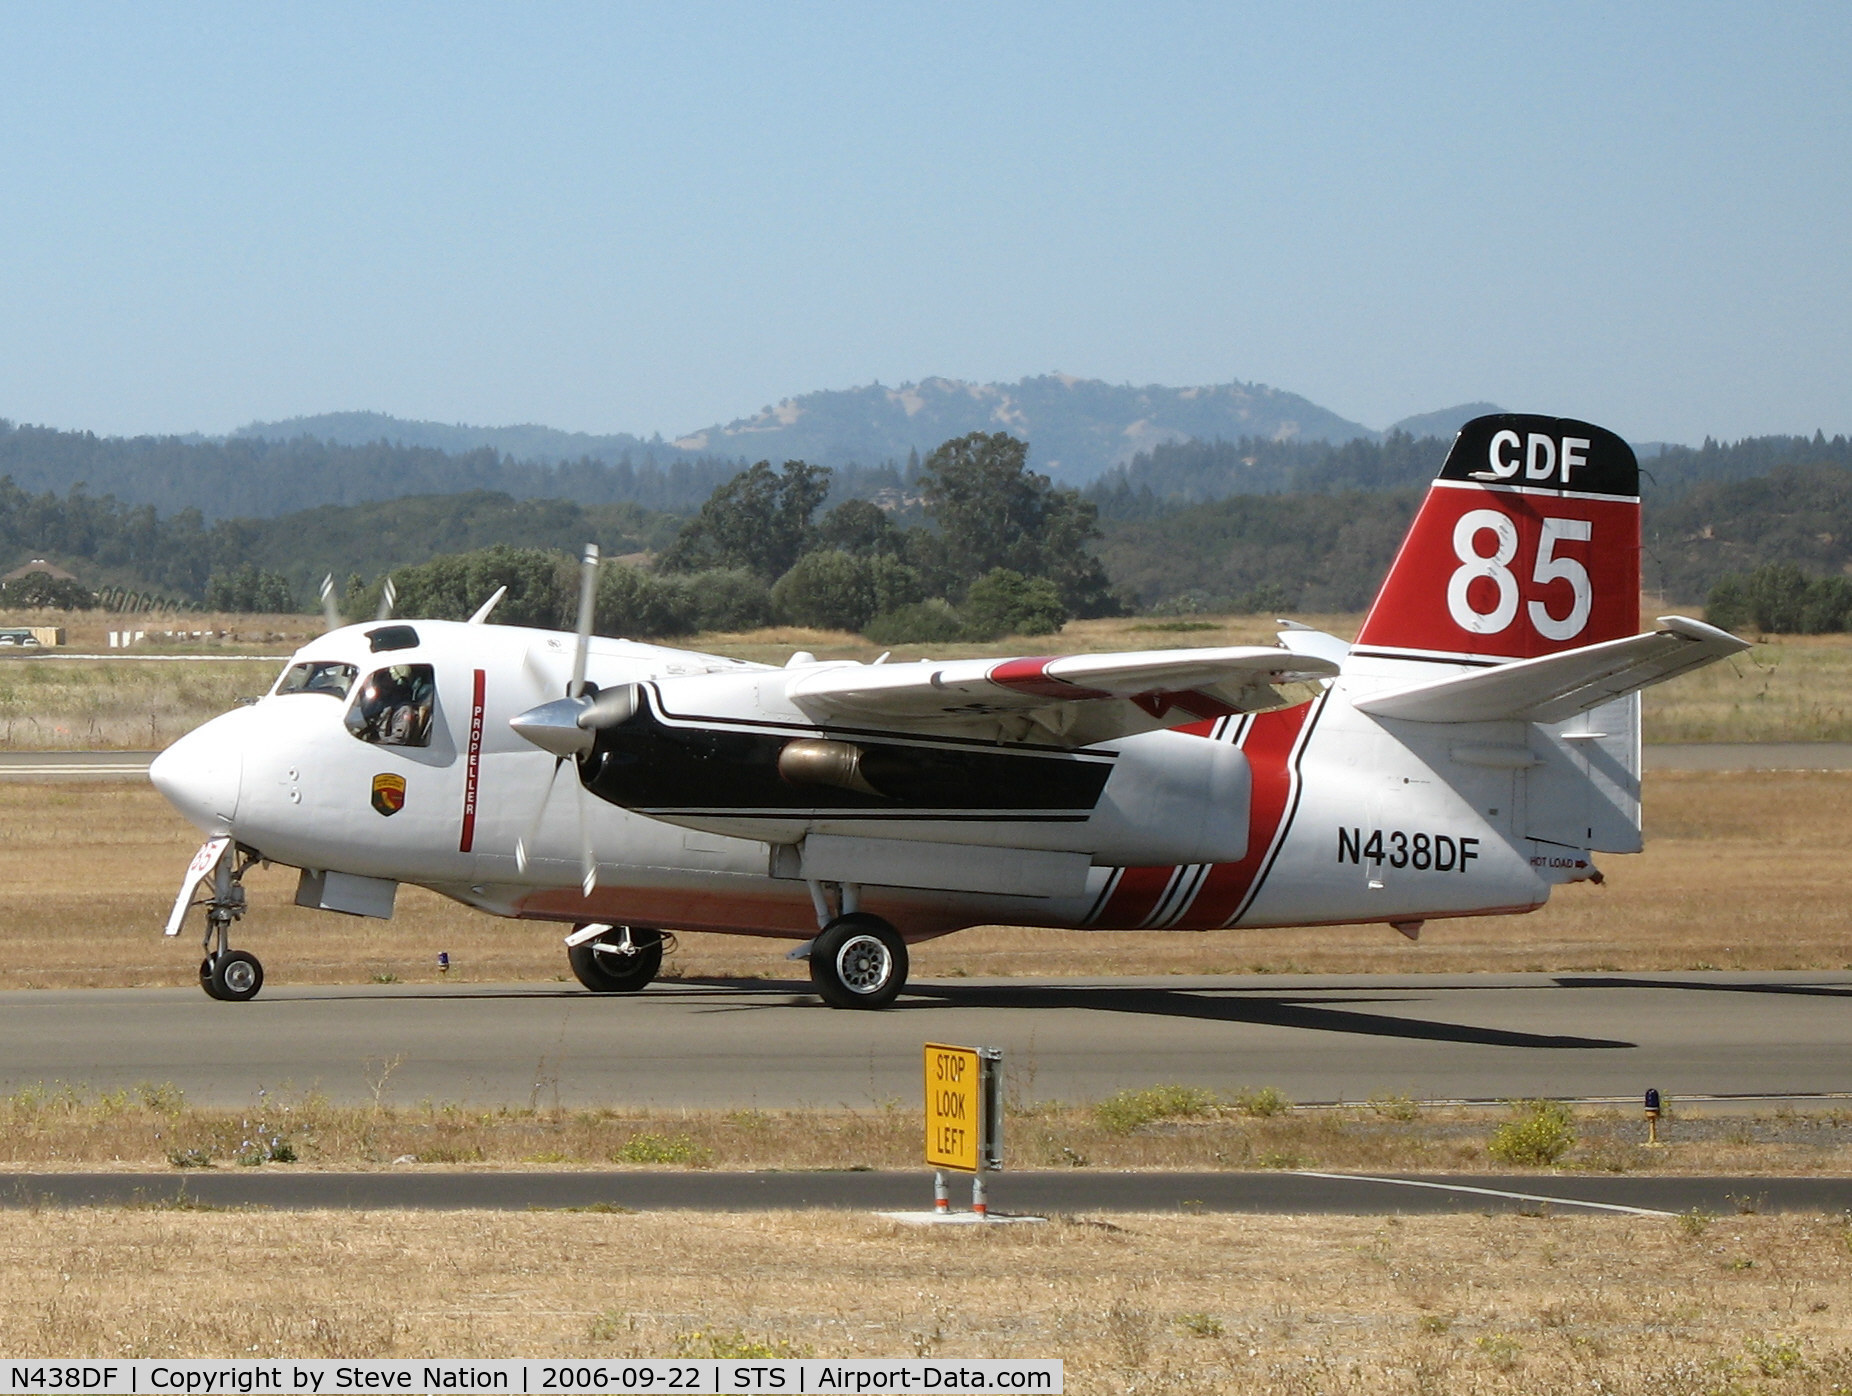 N438DF, Marsh Aviation S-2F3AT C/N 151640, Santa Rosa-based CDF S-2T Tanker #85 with relief pilot Bill Buckley at the controls taxying out for take-off at Sonoma County Airport, CA for firefighting mission